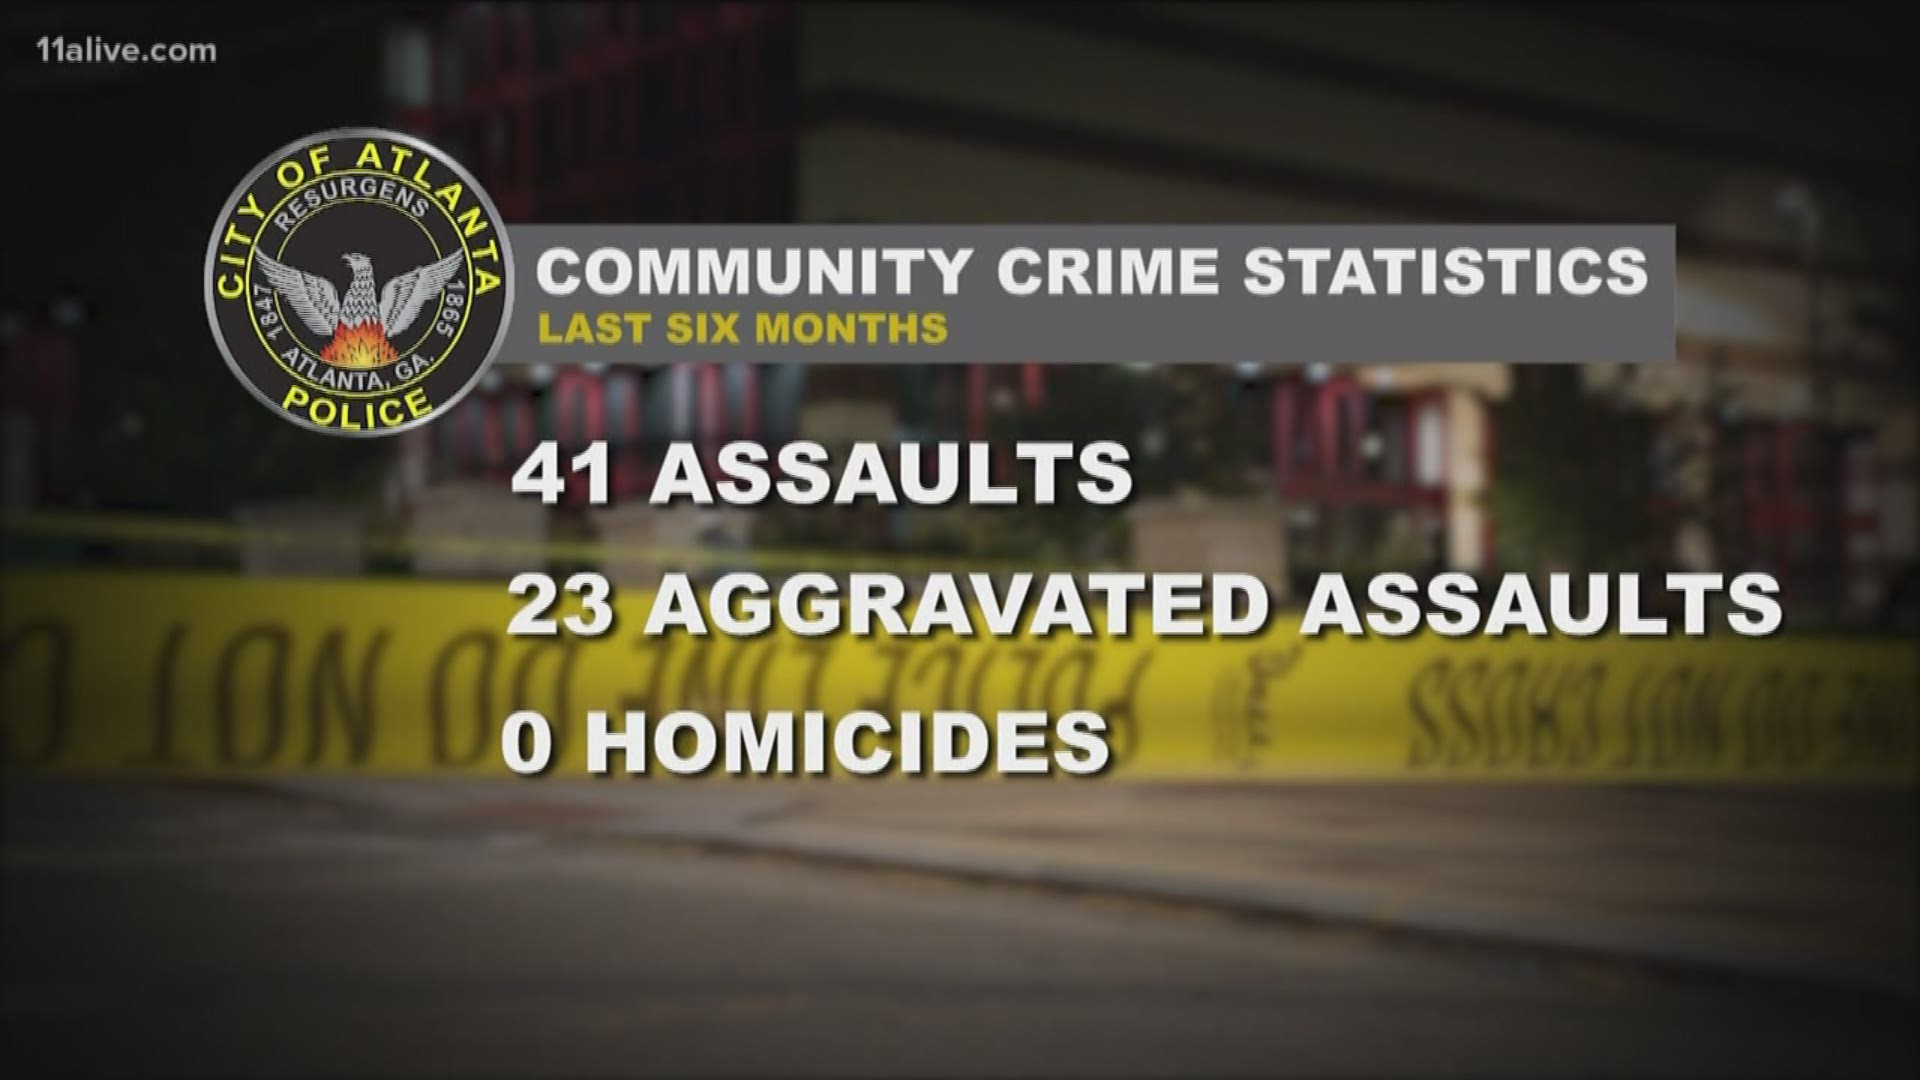 Data from the last six months show the number of assaults, aggravated assaults and homicides near the area.